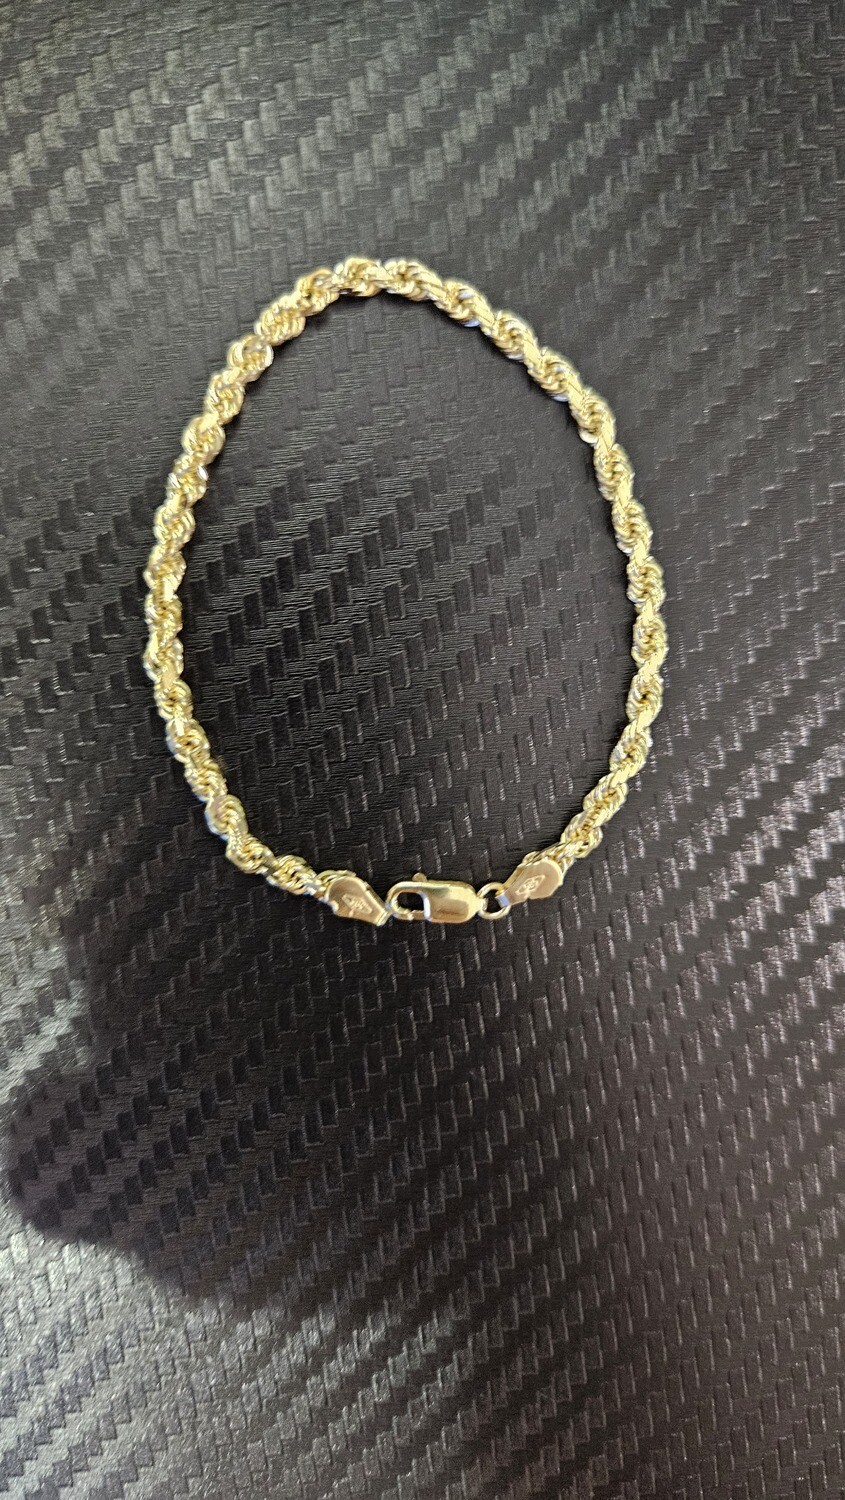 14K 3.5MM DIAMOND CUT ROPE BRACELET, WEIGHTS ARE APPROXIMATE: 14K 3.5MM 6.5&quot; DC ROPE BRACELET 6.5 GRAMS